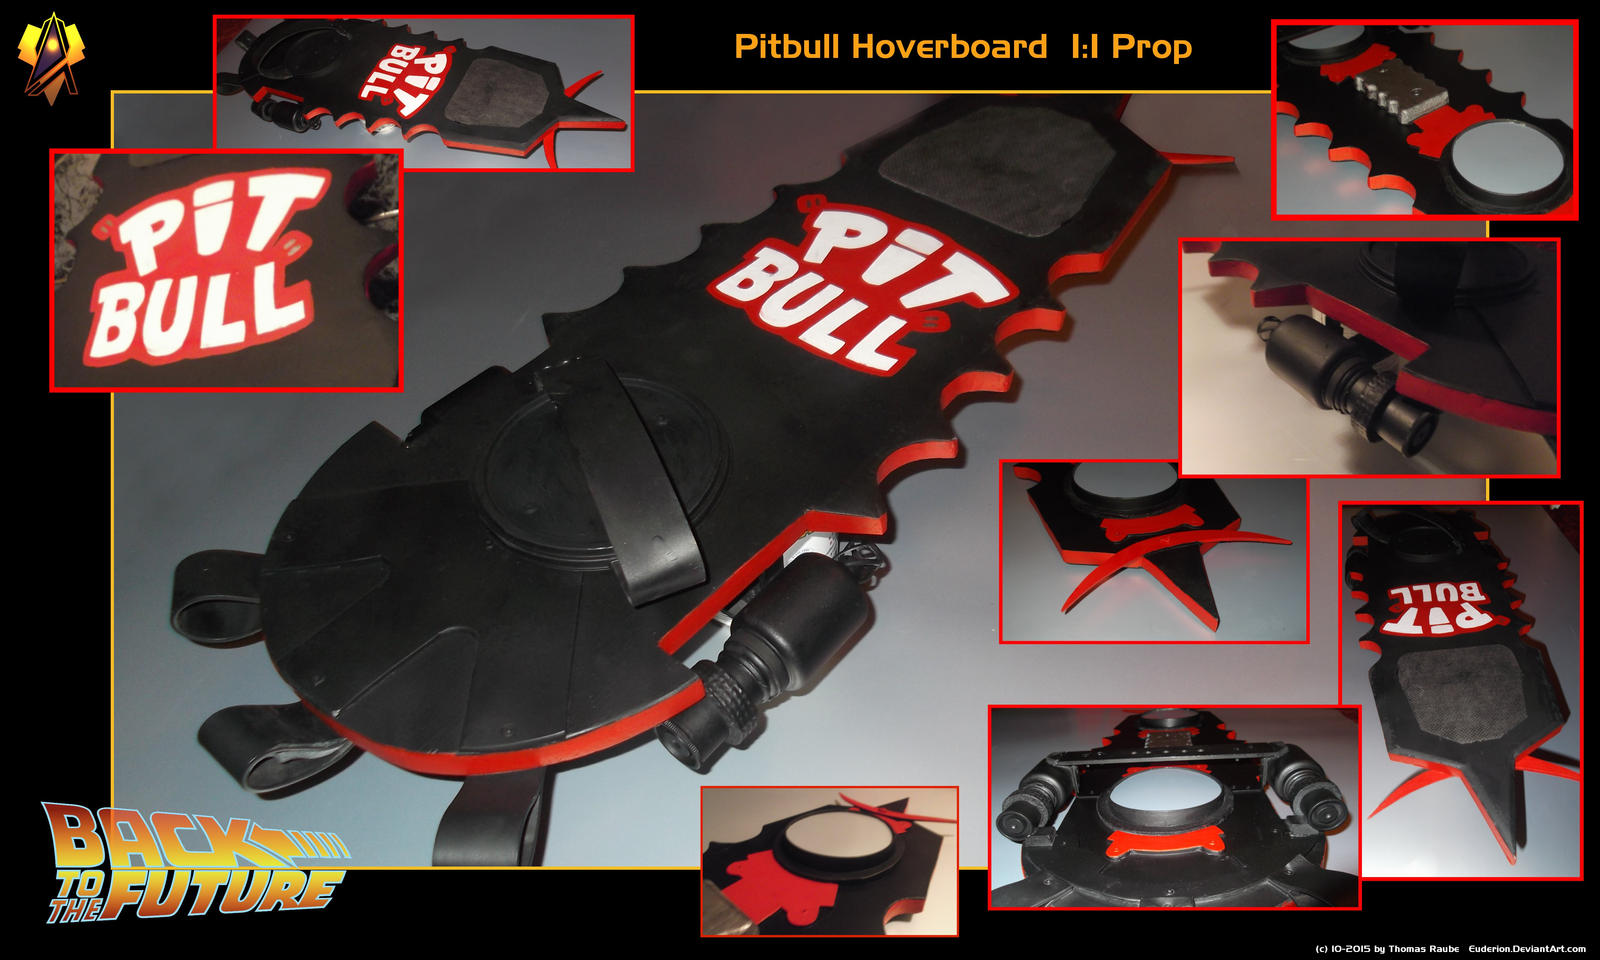 Pitbull Hoverboard Prop Step to Step by Euderion on DeviantArt